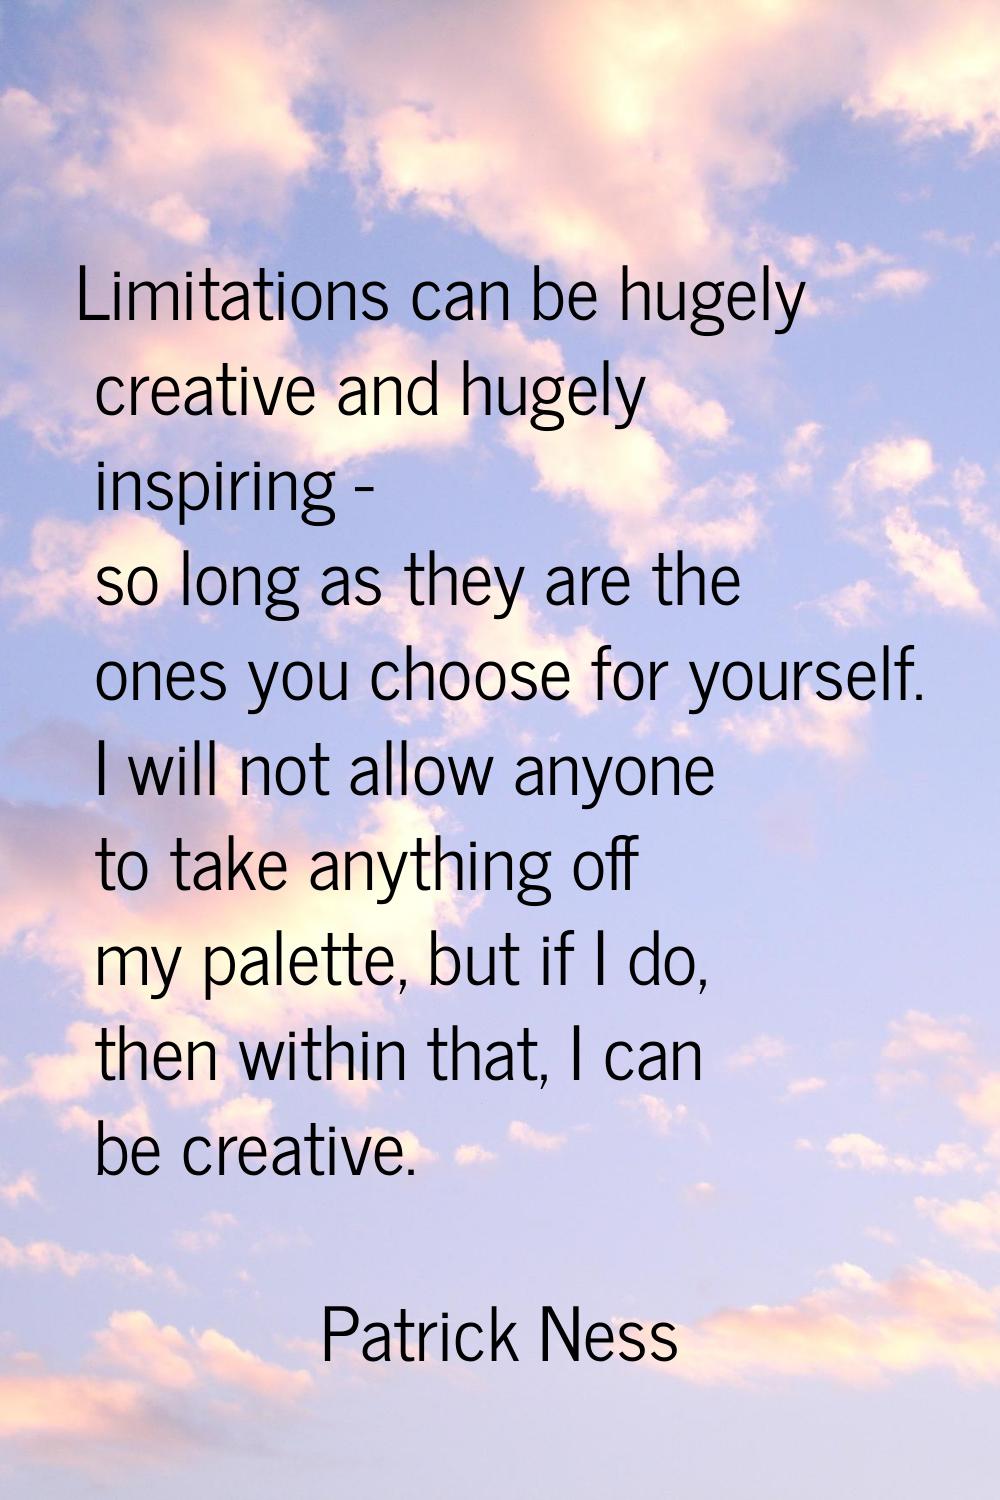 Limitations can be hugely creative and hugely inspiring - so long as they are the ones you choose f